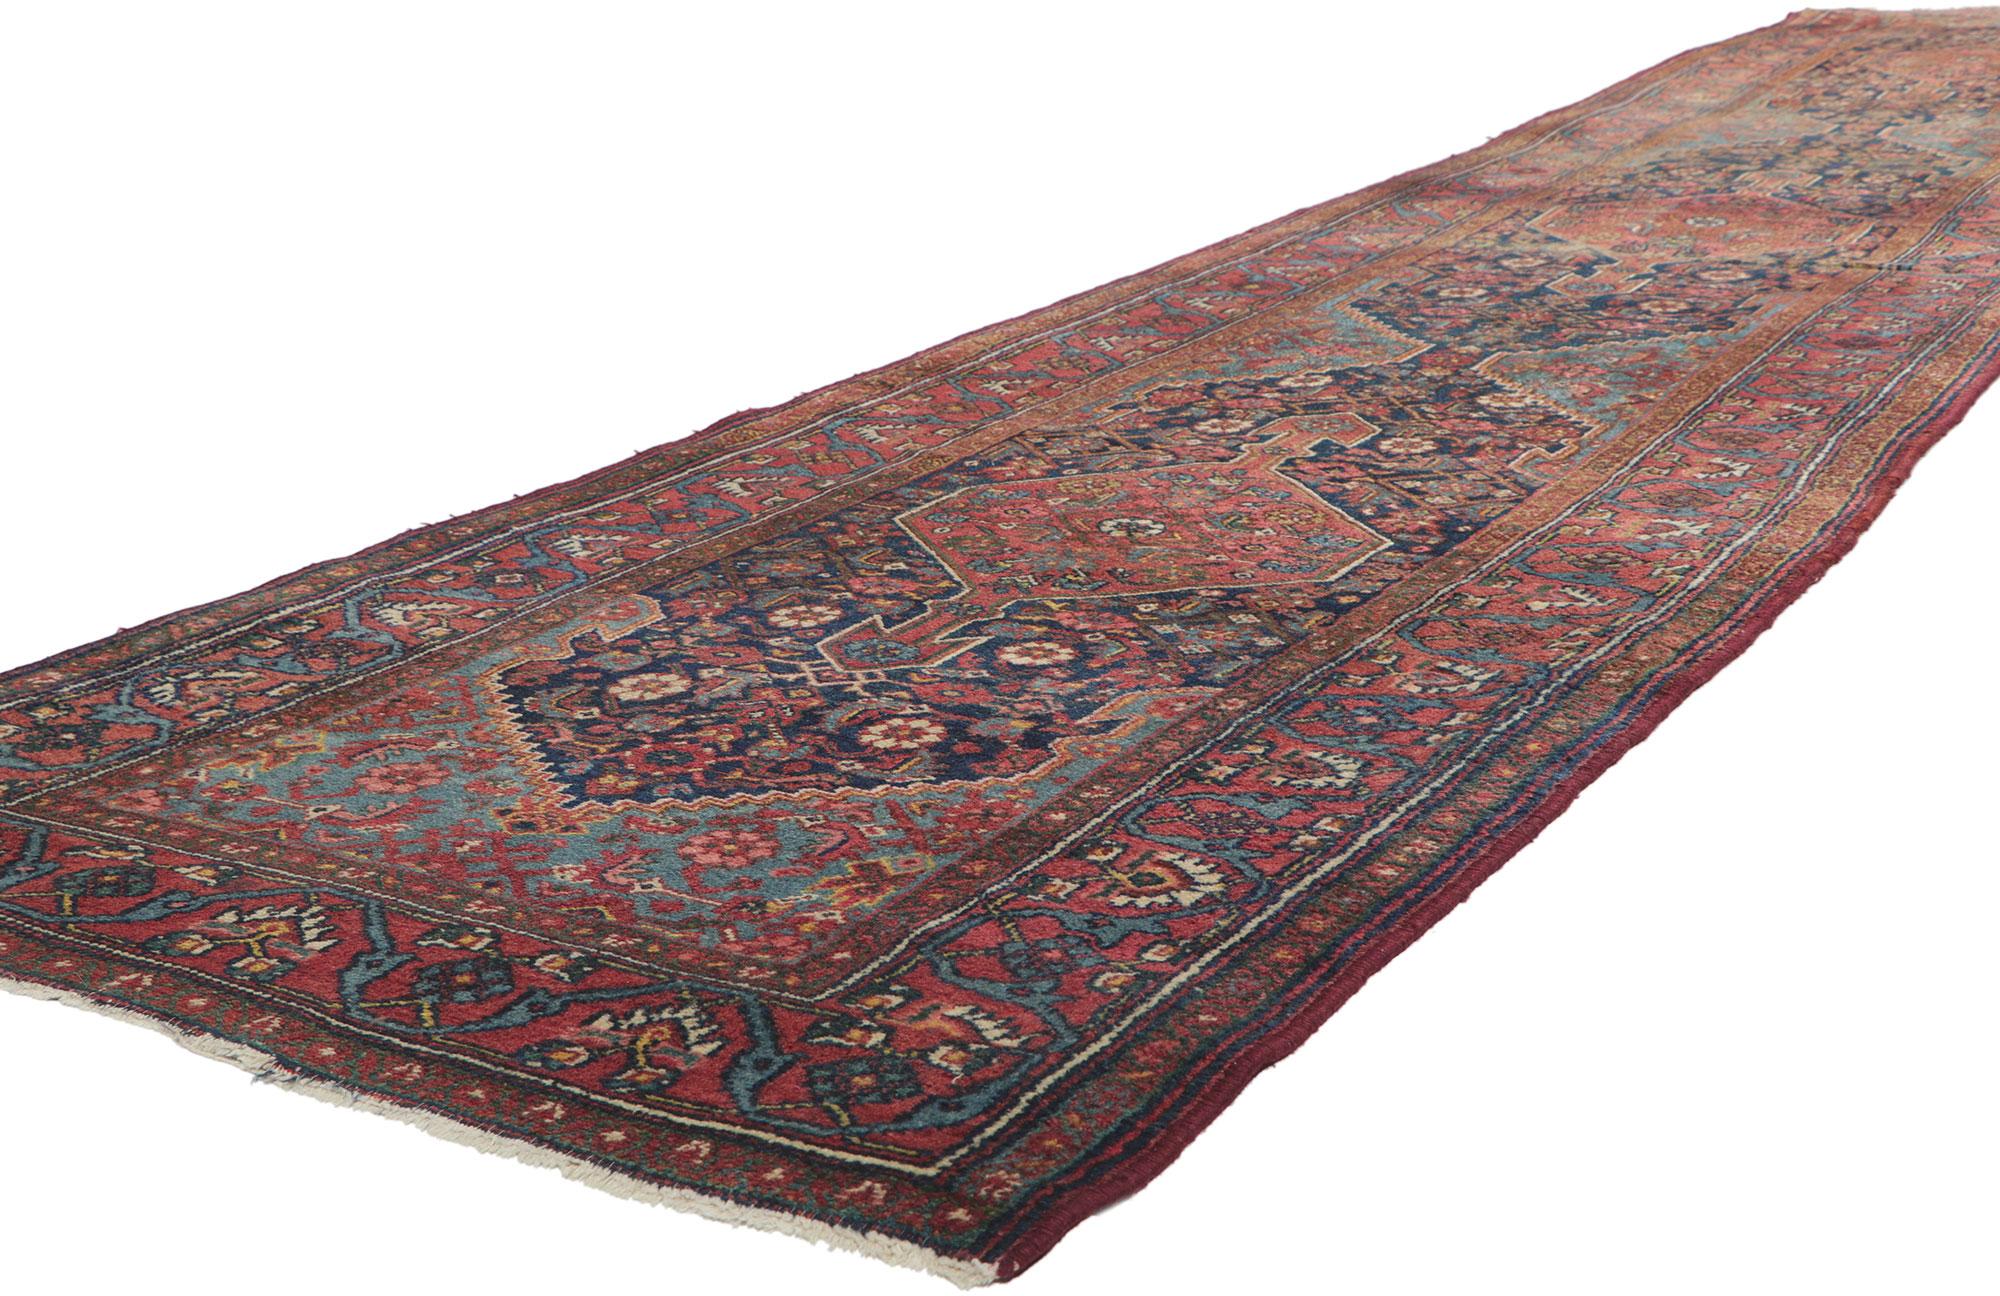 ?78321 Antique Persian Malayer runner, 03'03 x 16'11.
With its rugged charm, incredible detail and texture, this hand knotted wool antique Persian Malayer runner is a captivating vision of woven beauty. The classic Herati design and traditional